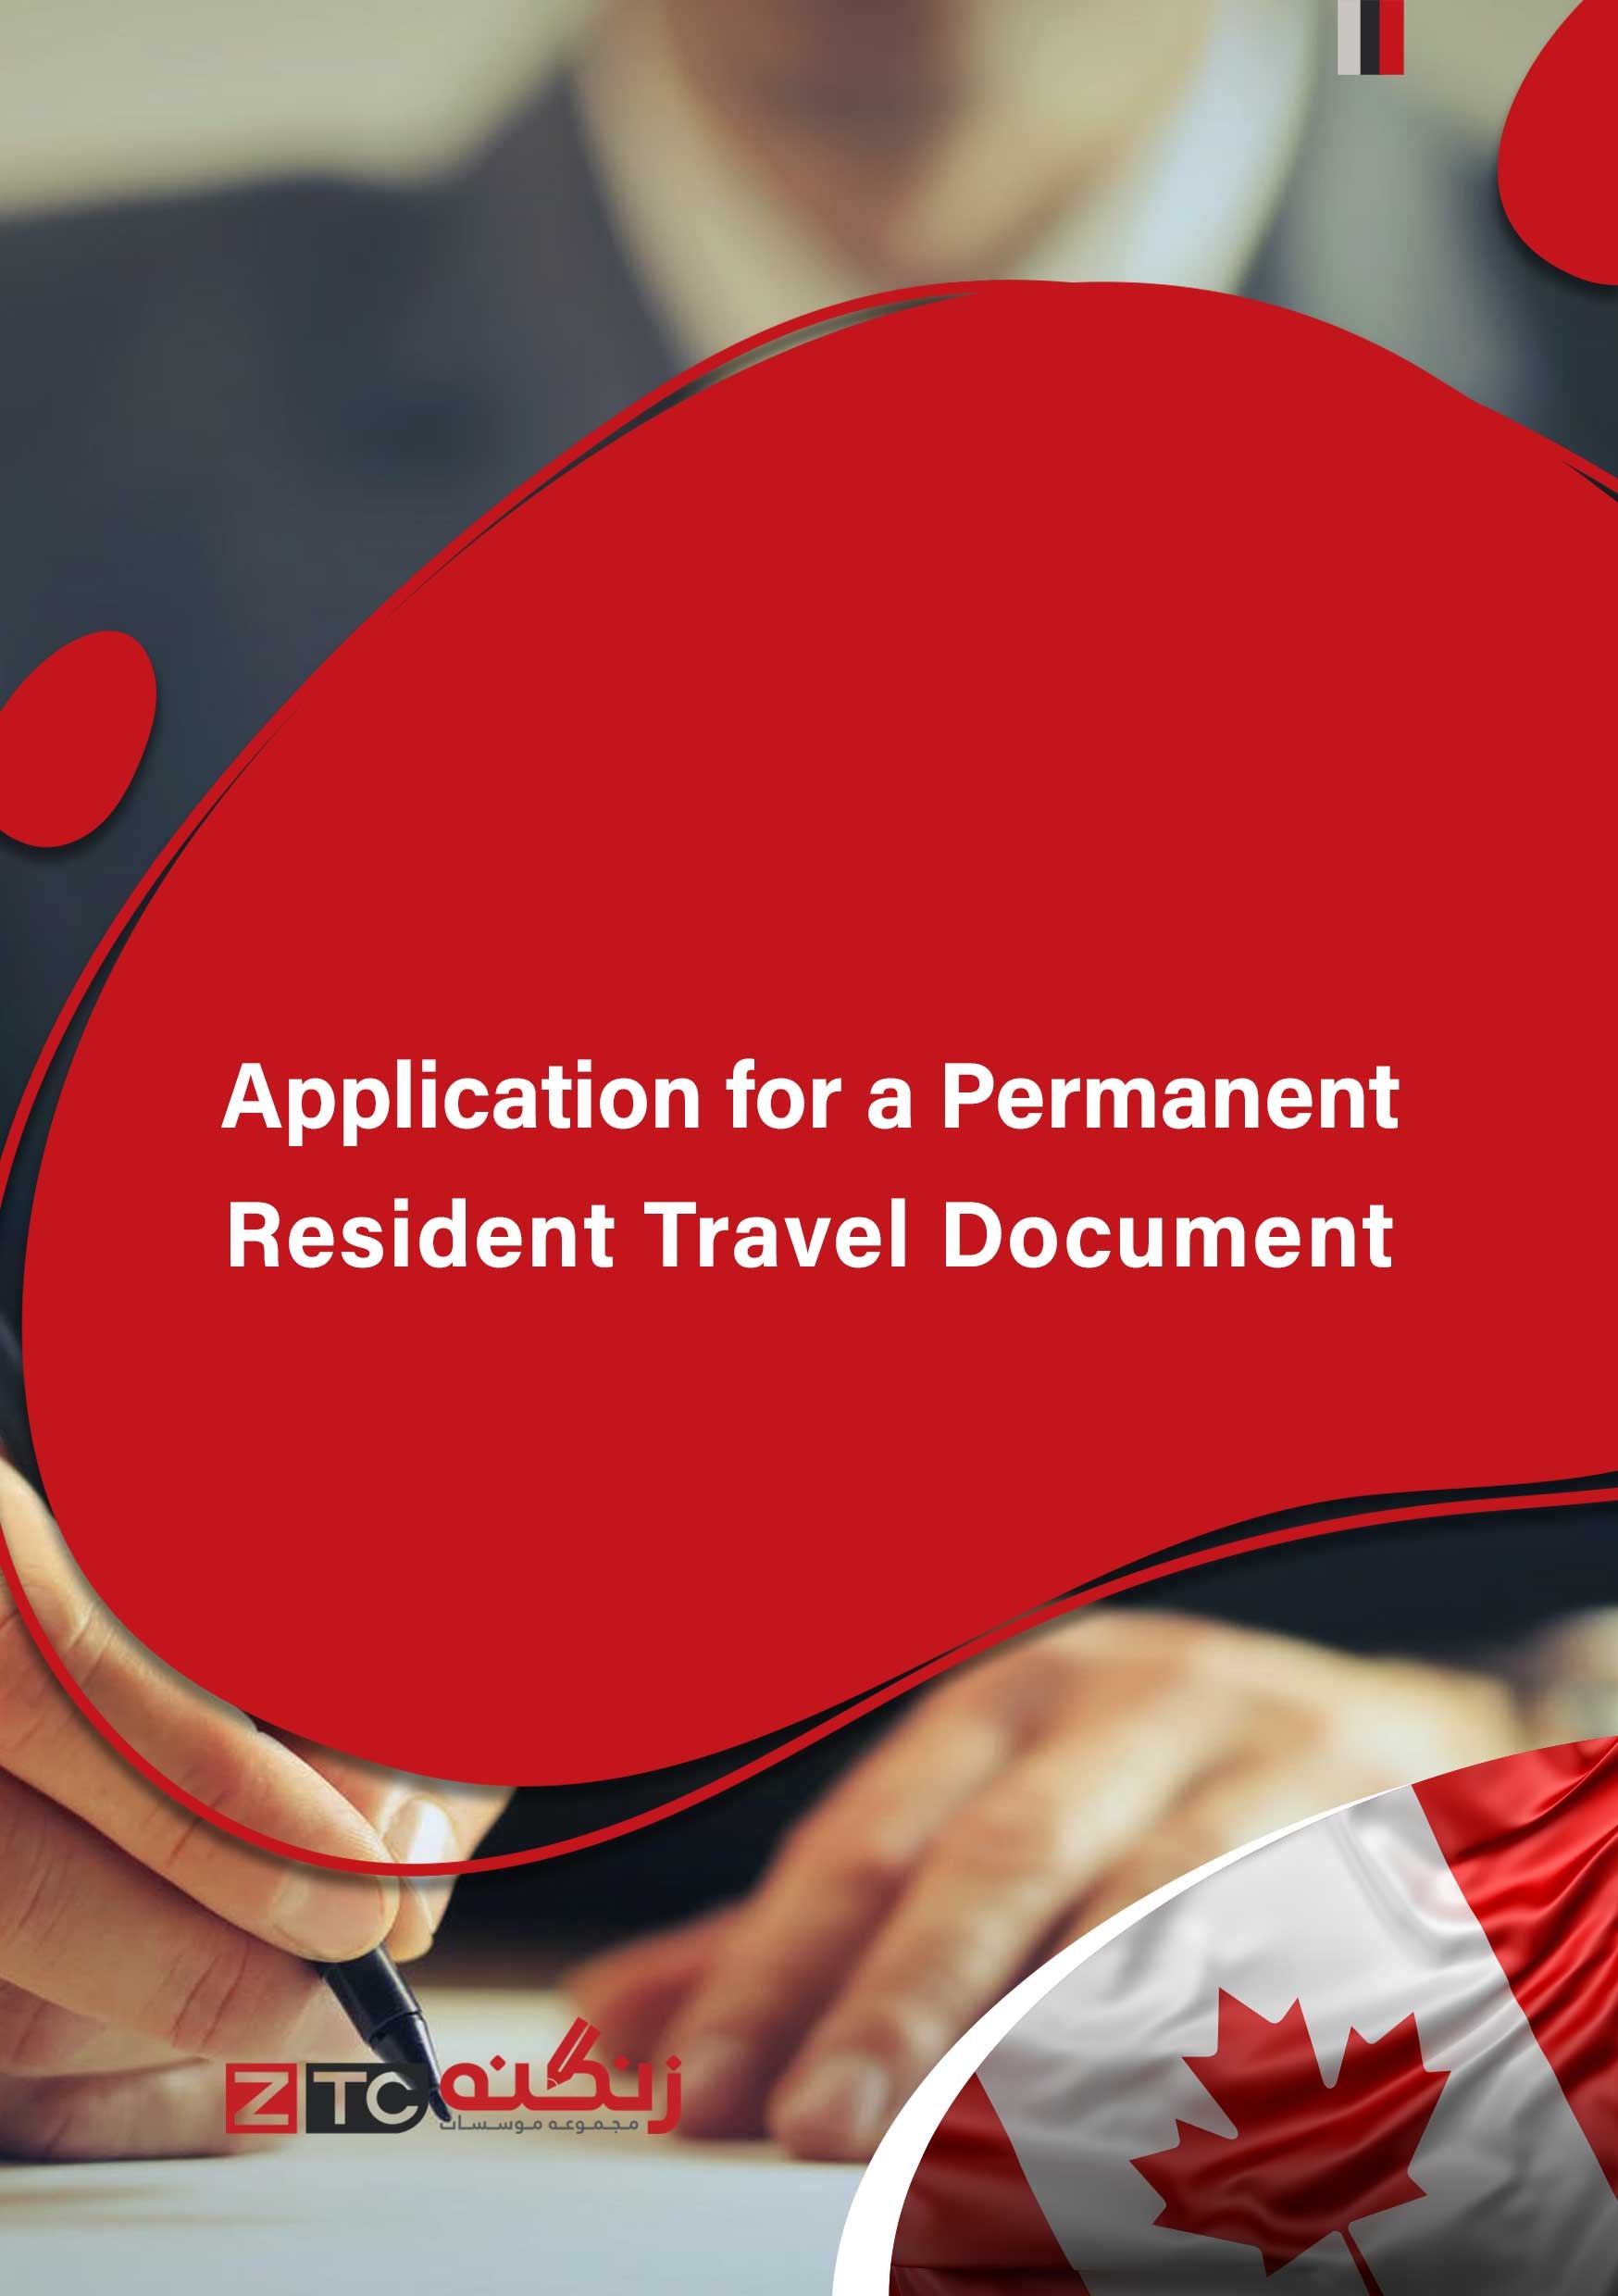 Application for a Permanent Resident Travel Document